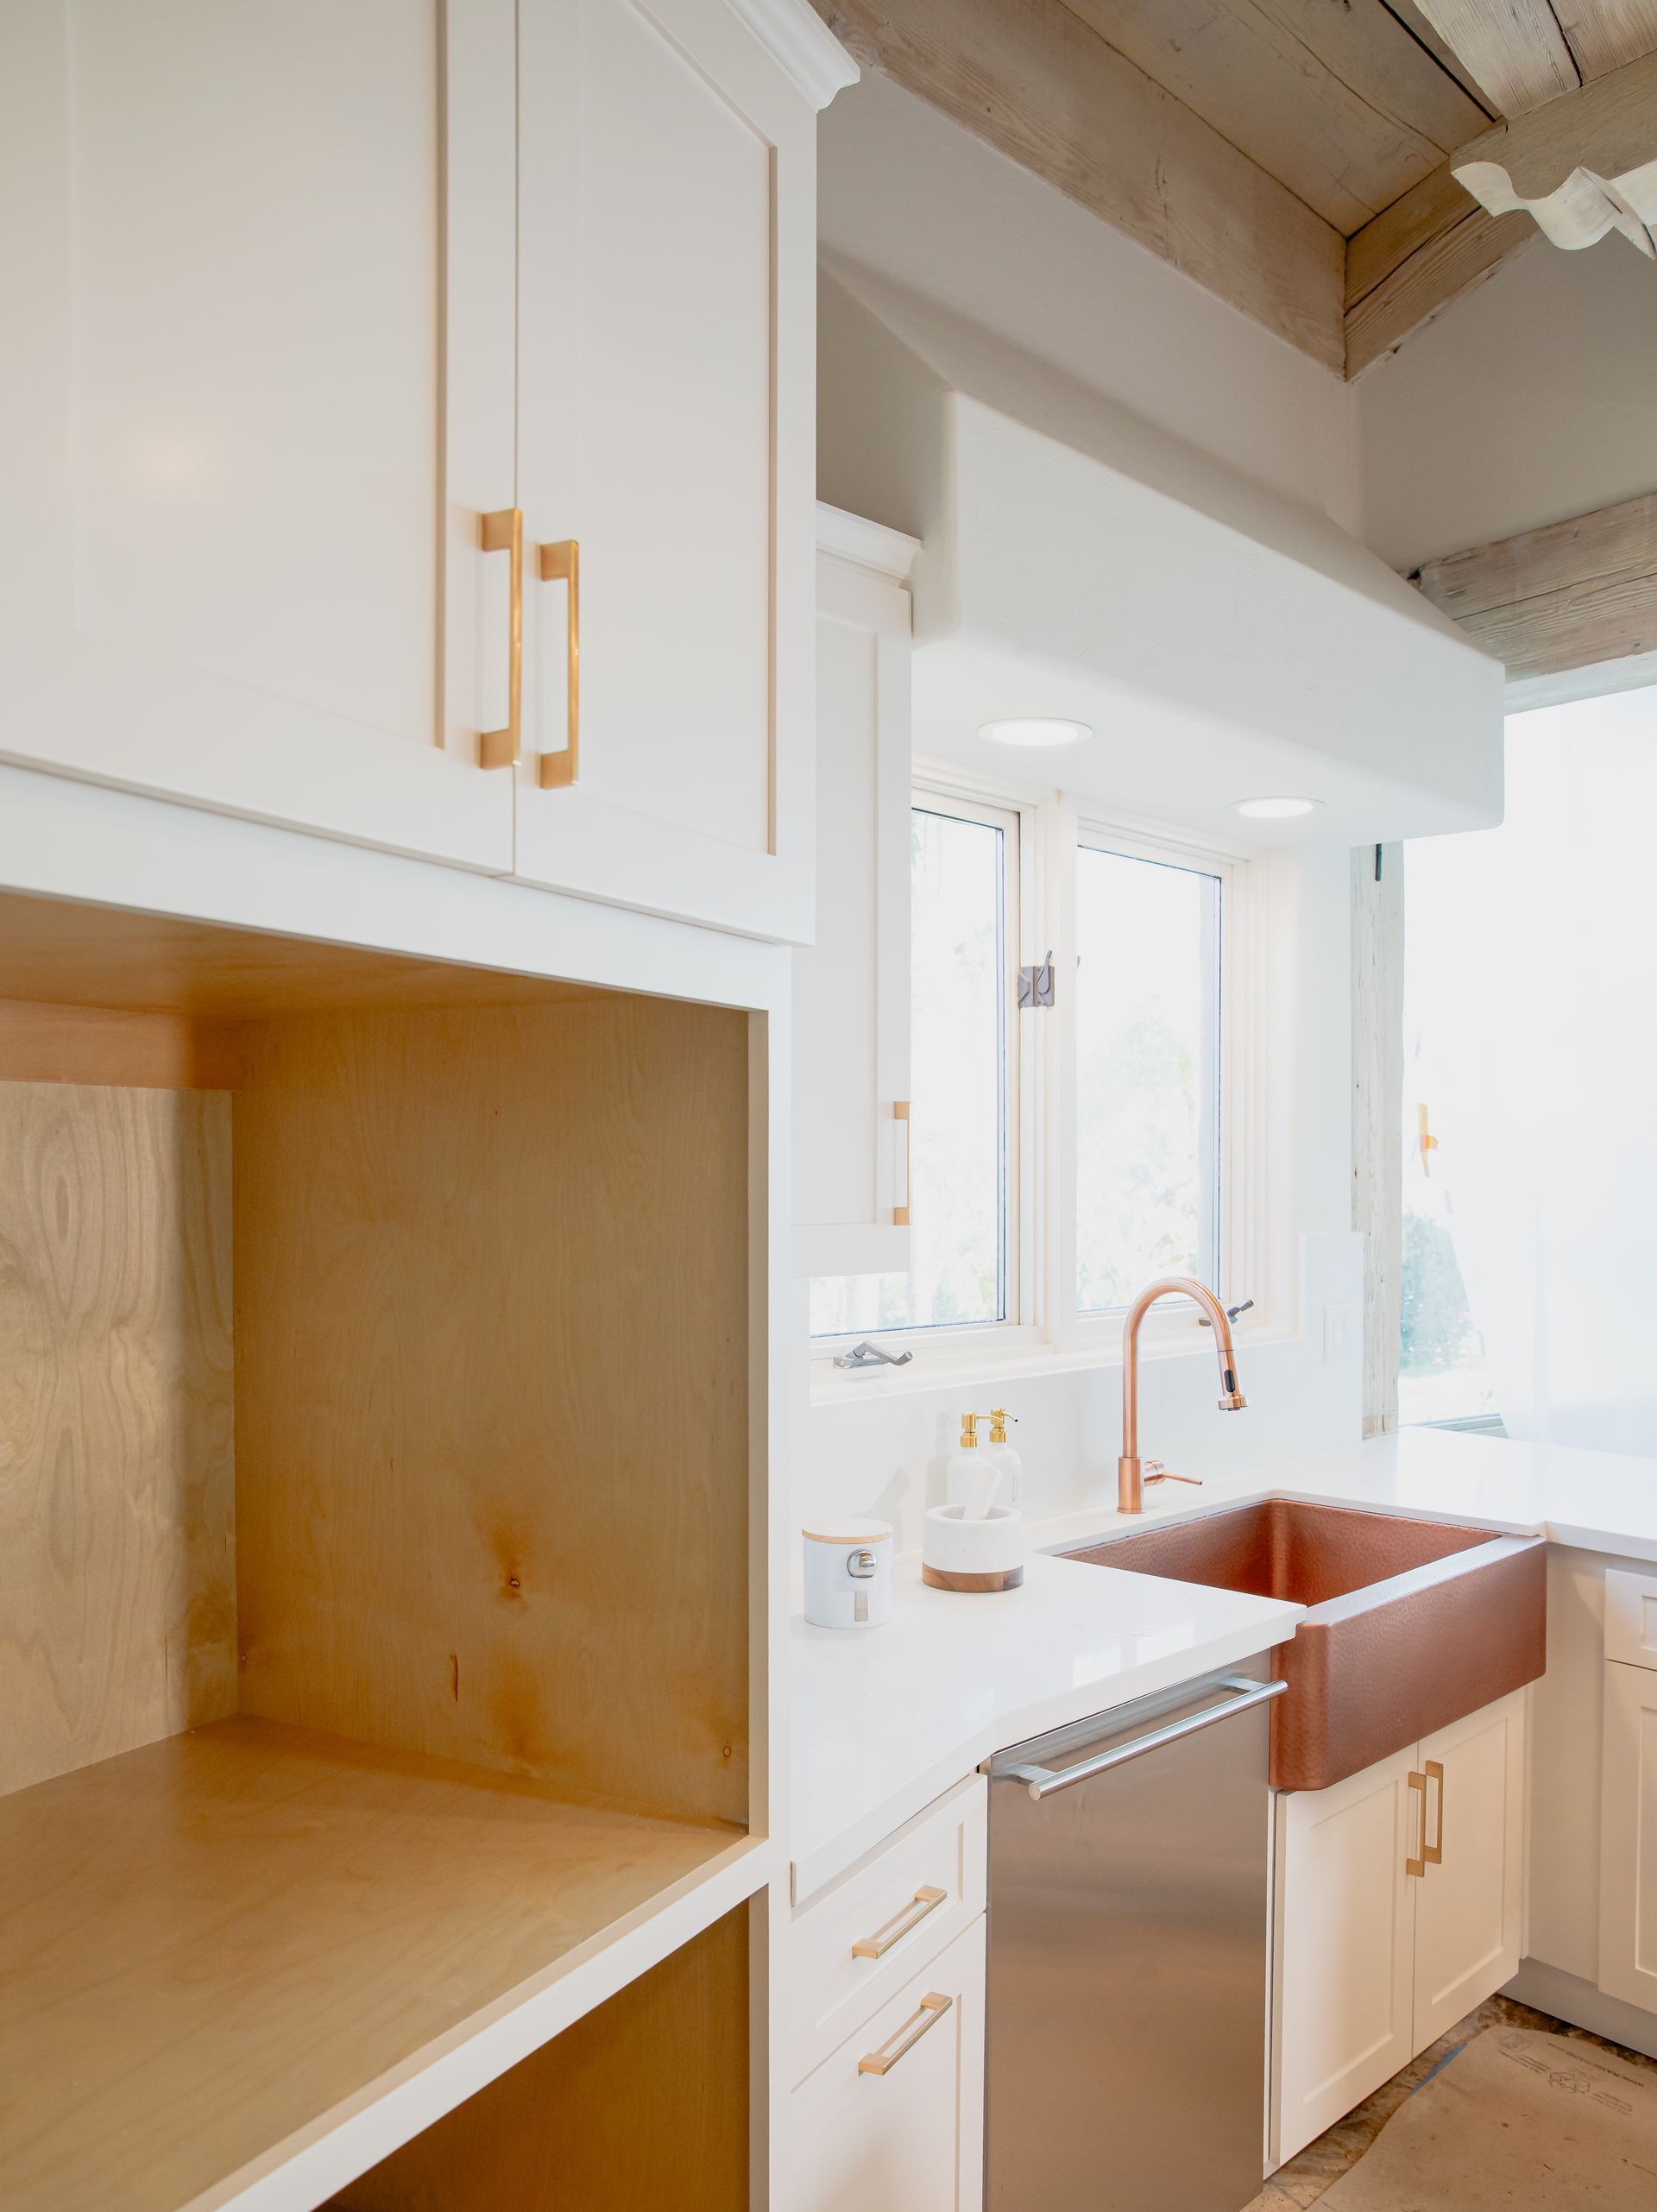 A kitchen with white cabinets and a copper sink